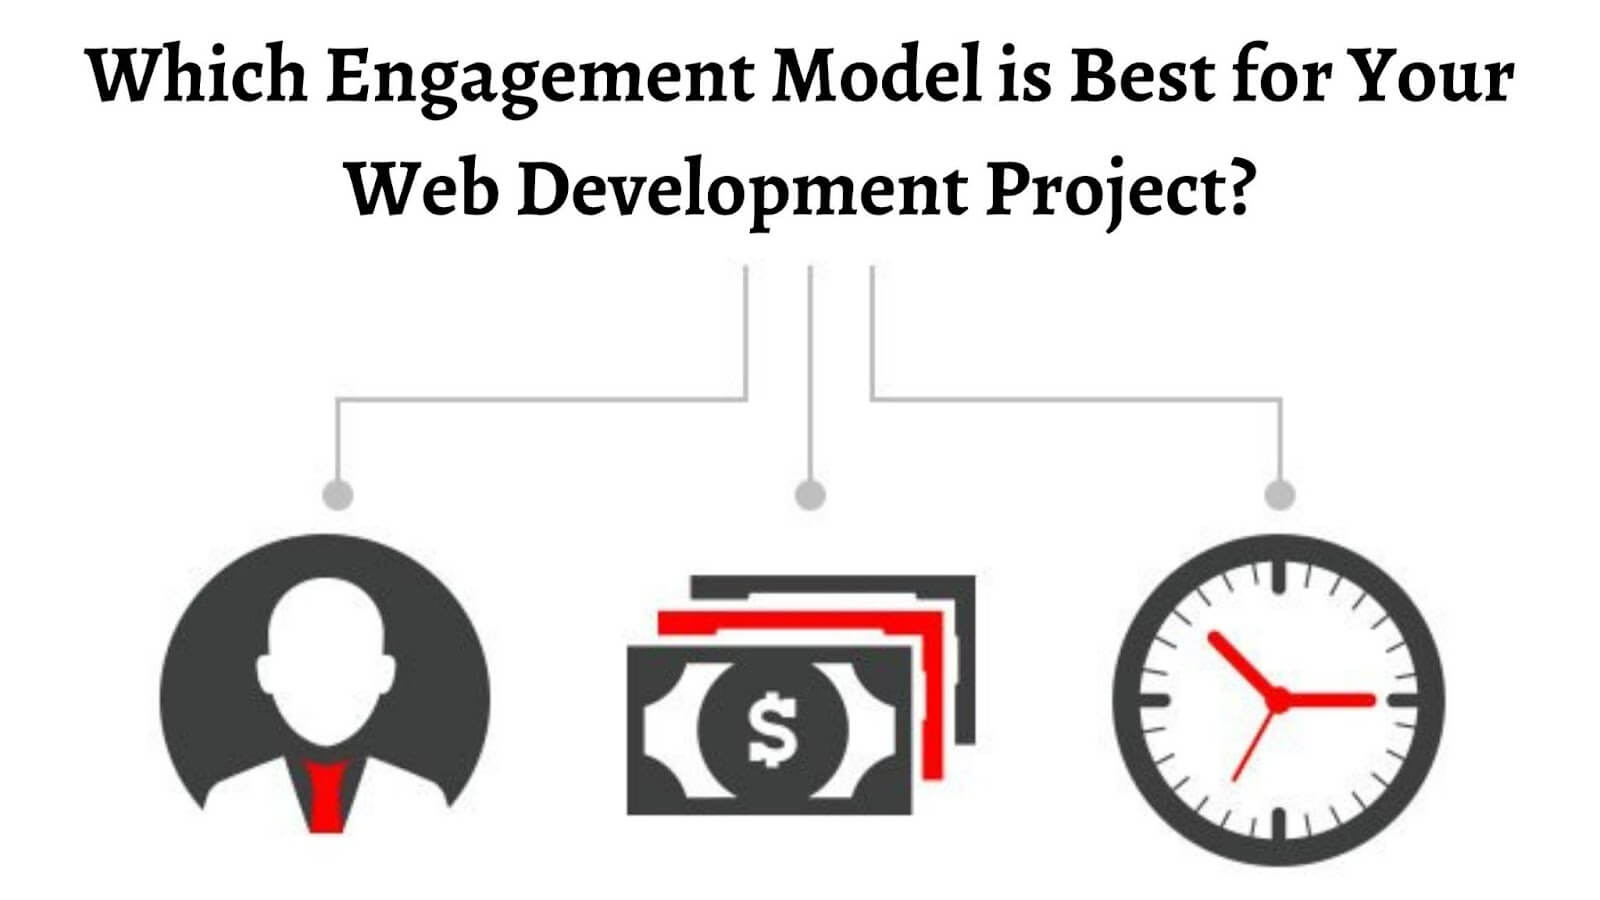 Which Engagement Model is Best for Your Web Development Project?